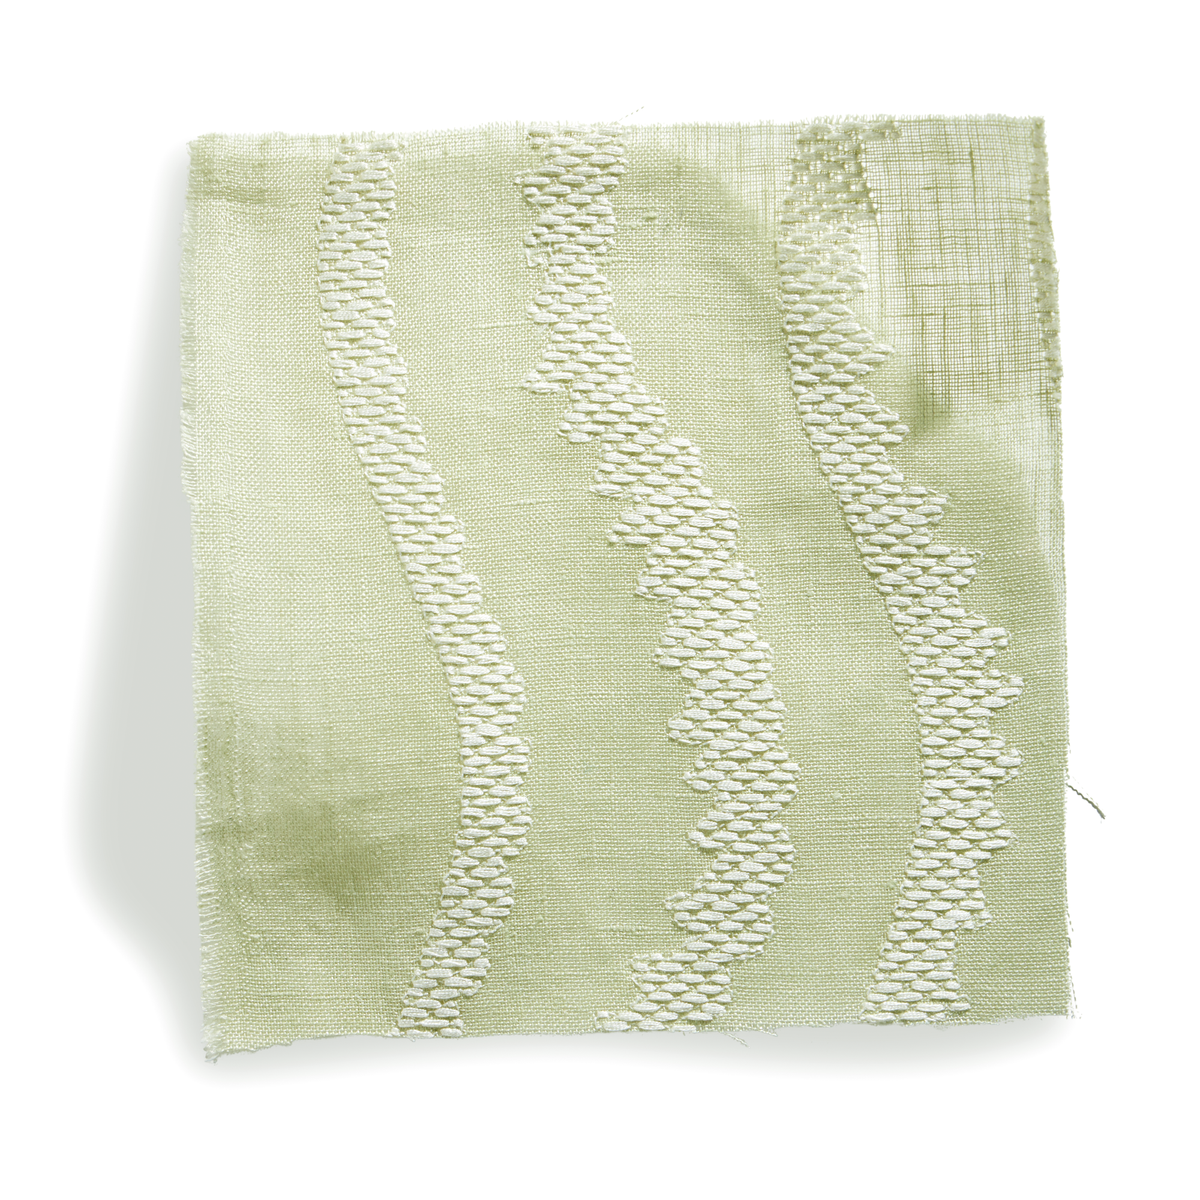 Notched Vines Fabric in Pistachio